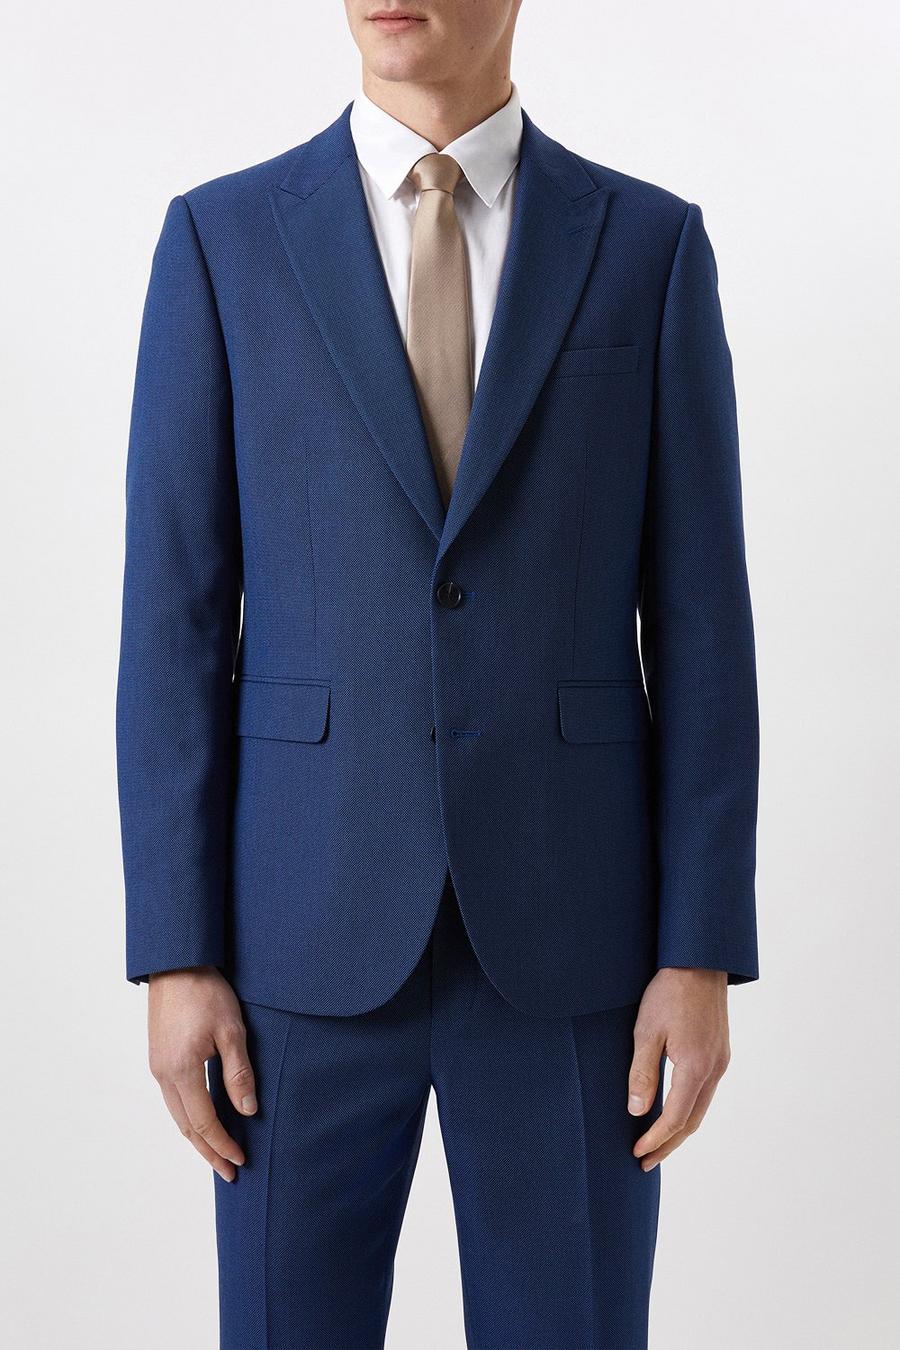 Plus And Tall Slim Fit Blue Birdseye Two-Piece Suit